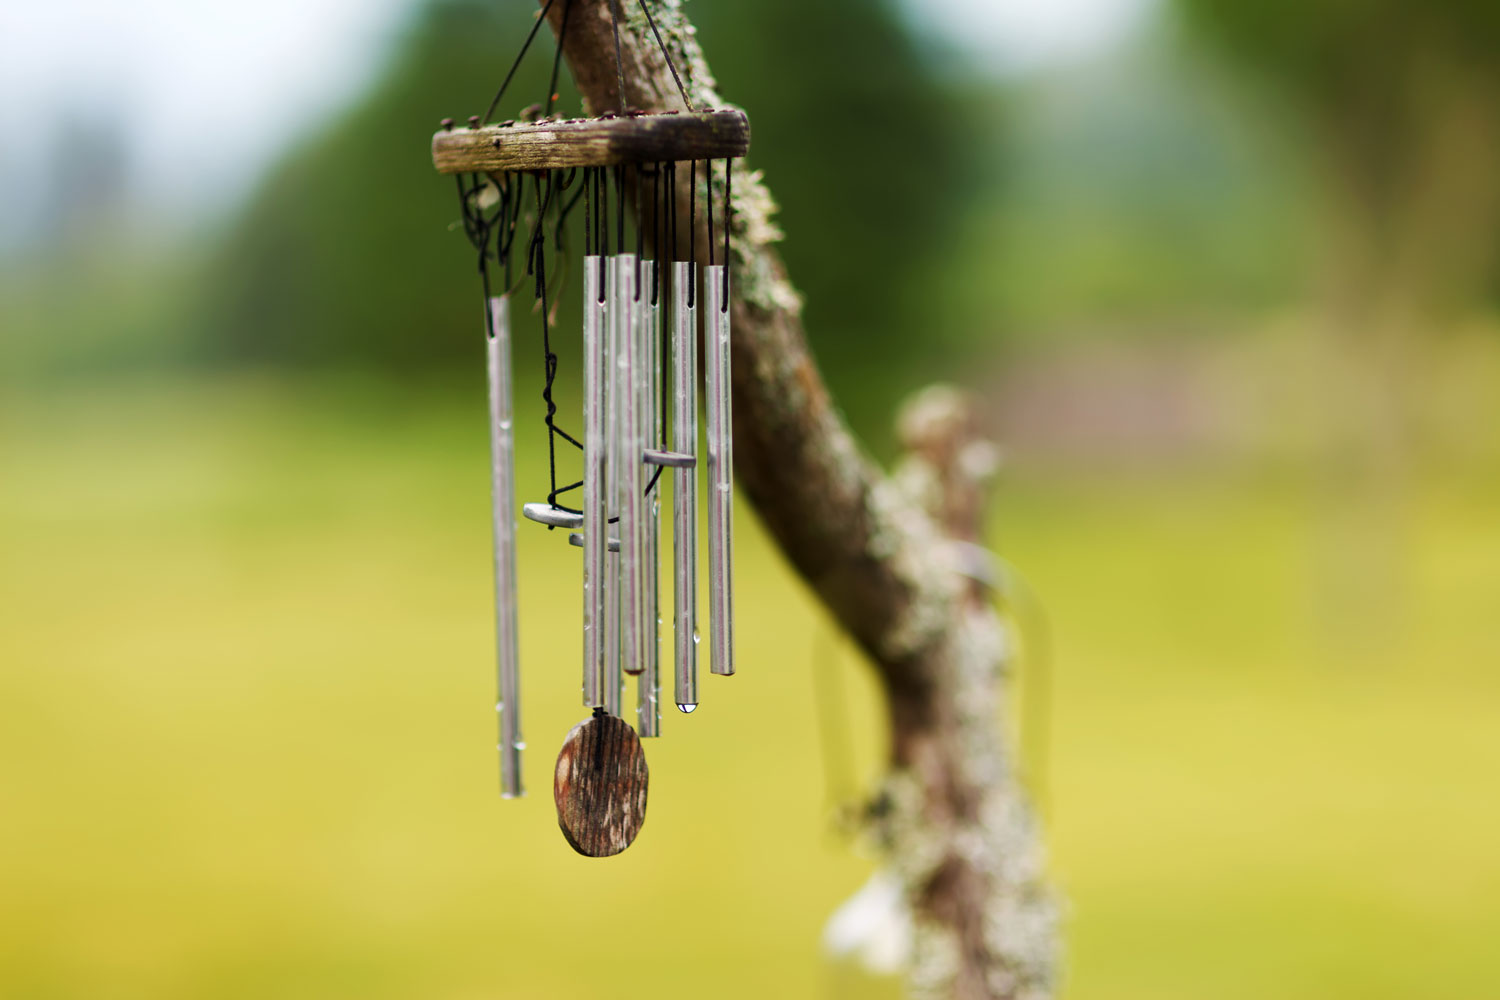 Wind chimes hanged on a tree branch